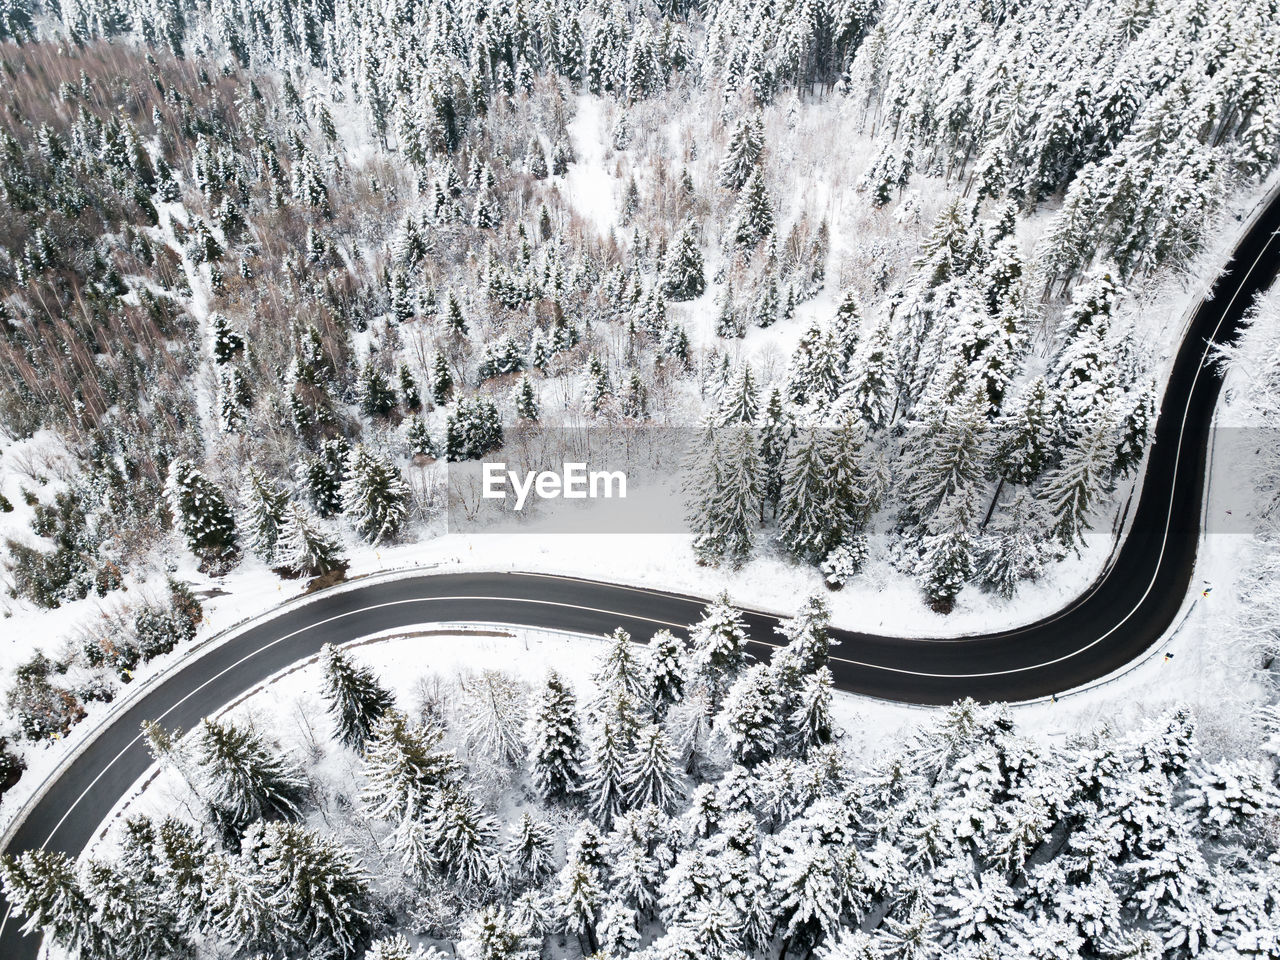 Aerial view of a road winding through snow covered forest